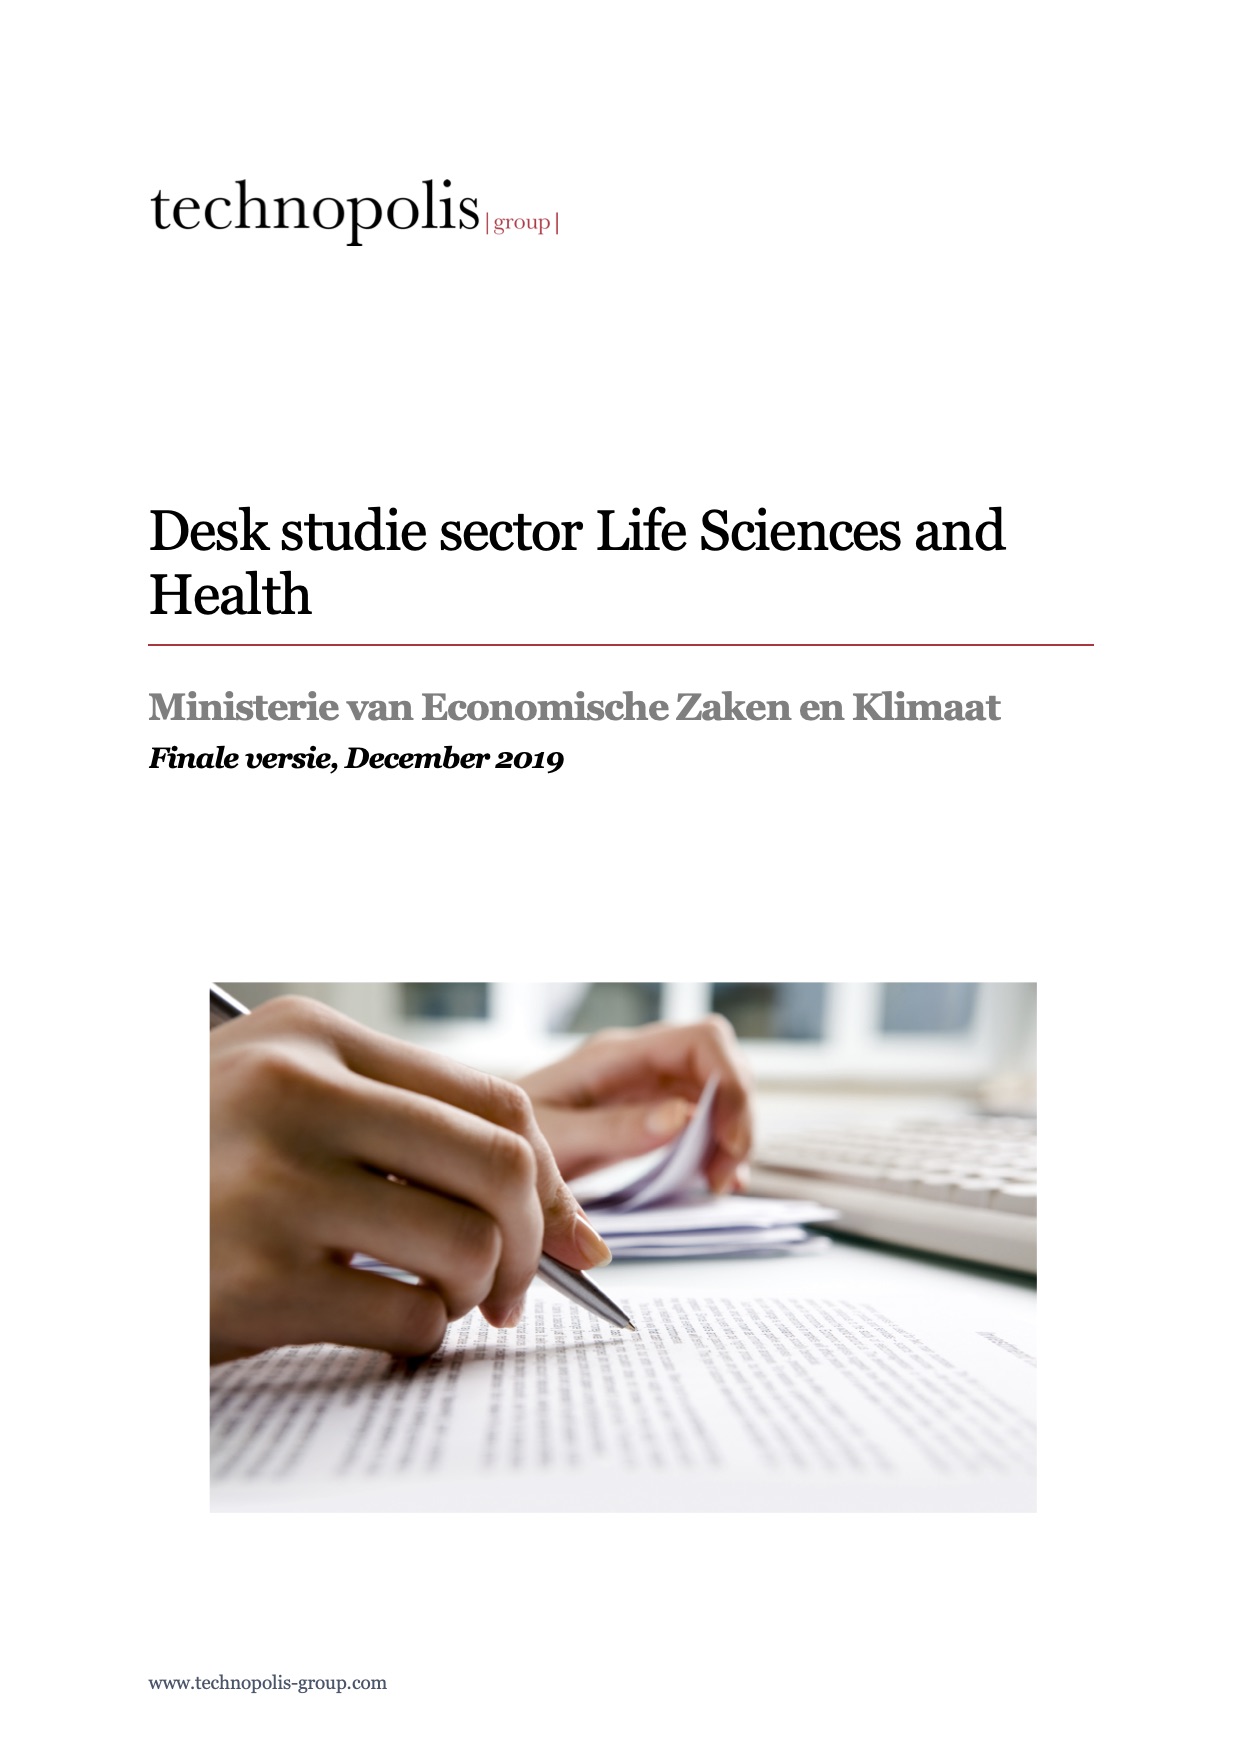 Desk study on the state of the Life Sciences and Health sector in the Netherlands